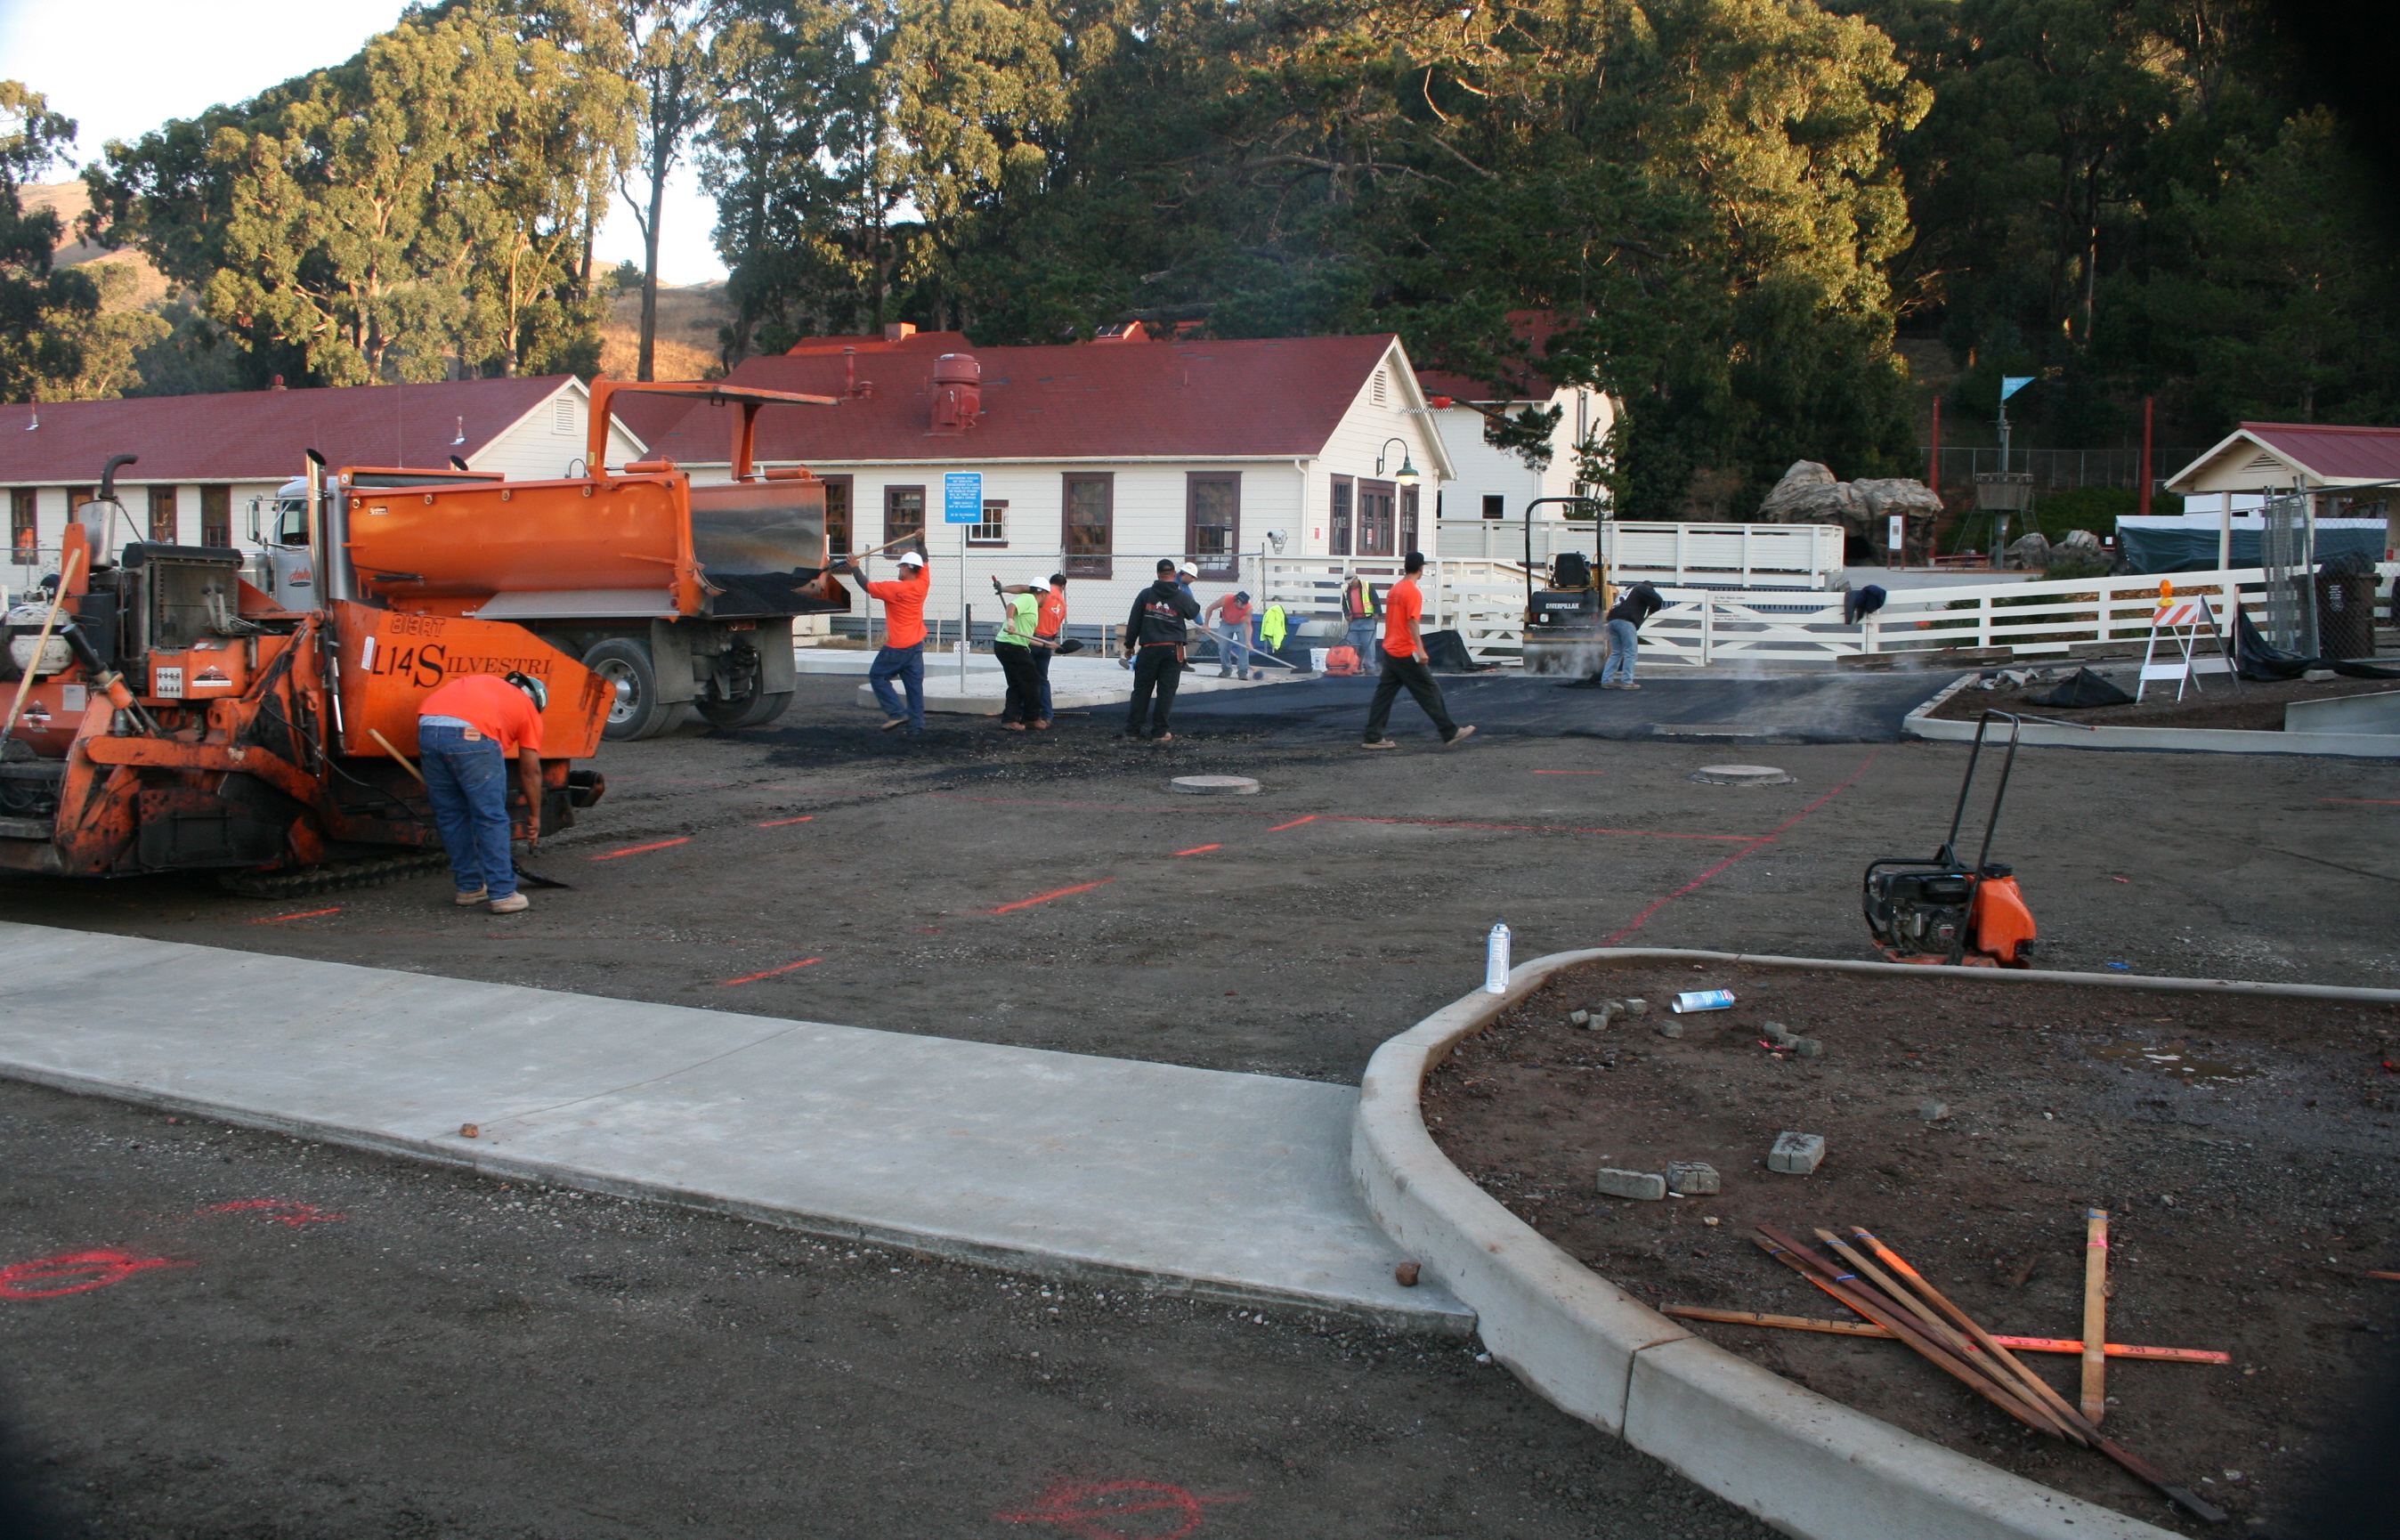 LArge paving constuction project